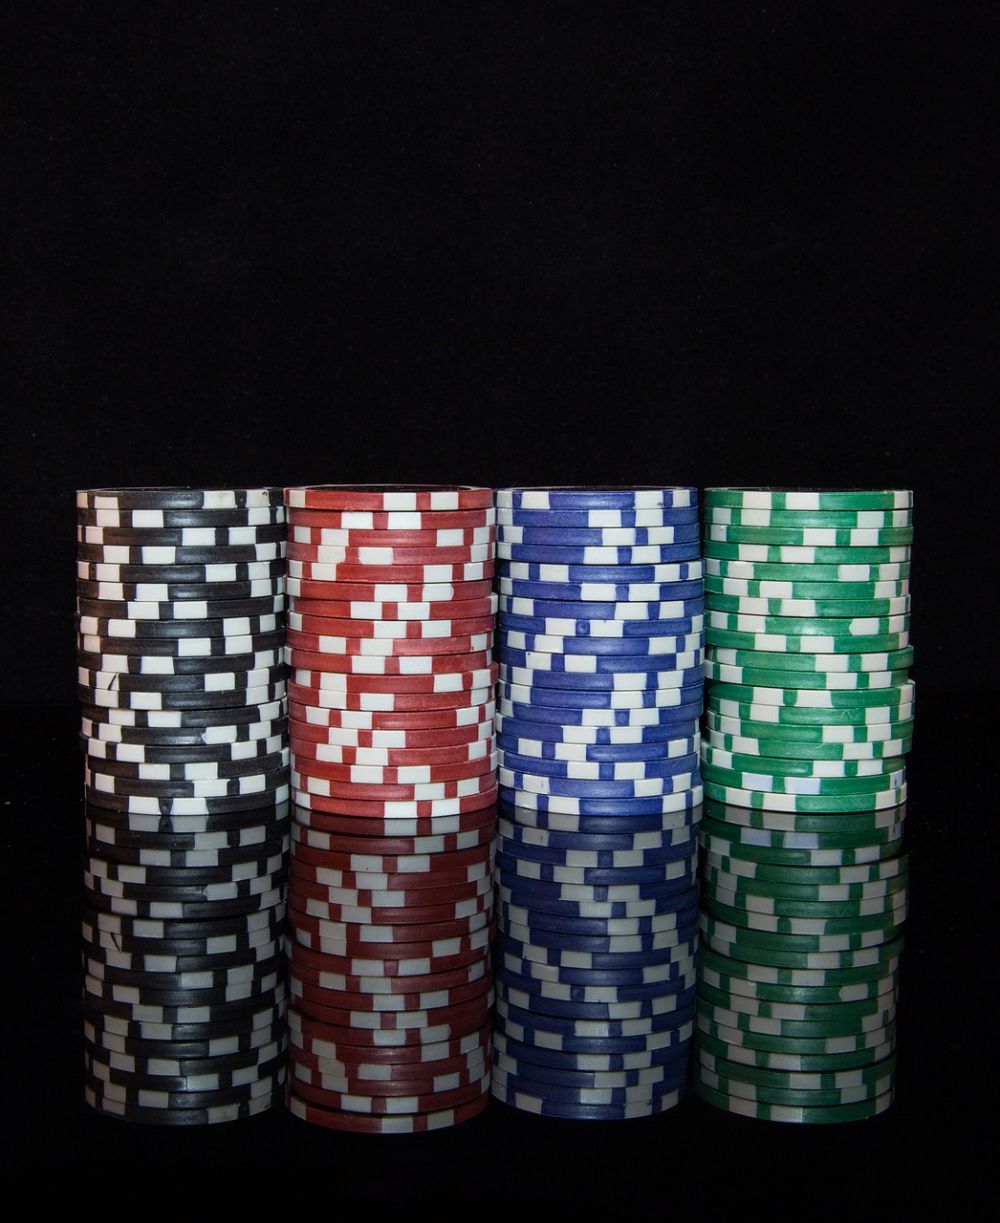 Free Blackjack: The Ultimate Guide to Playing and Winning